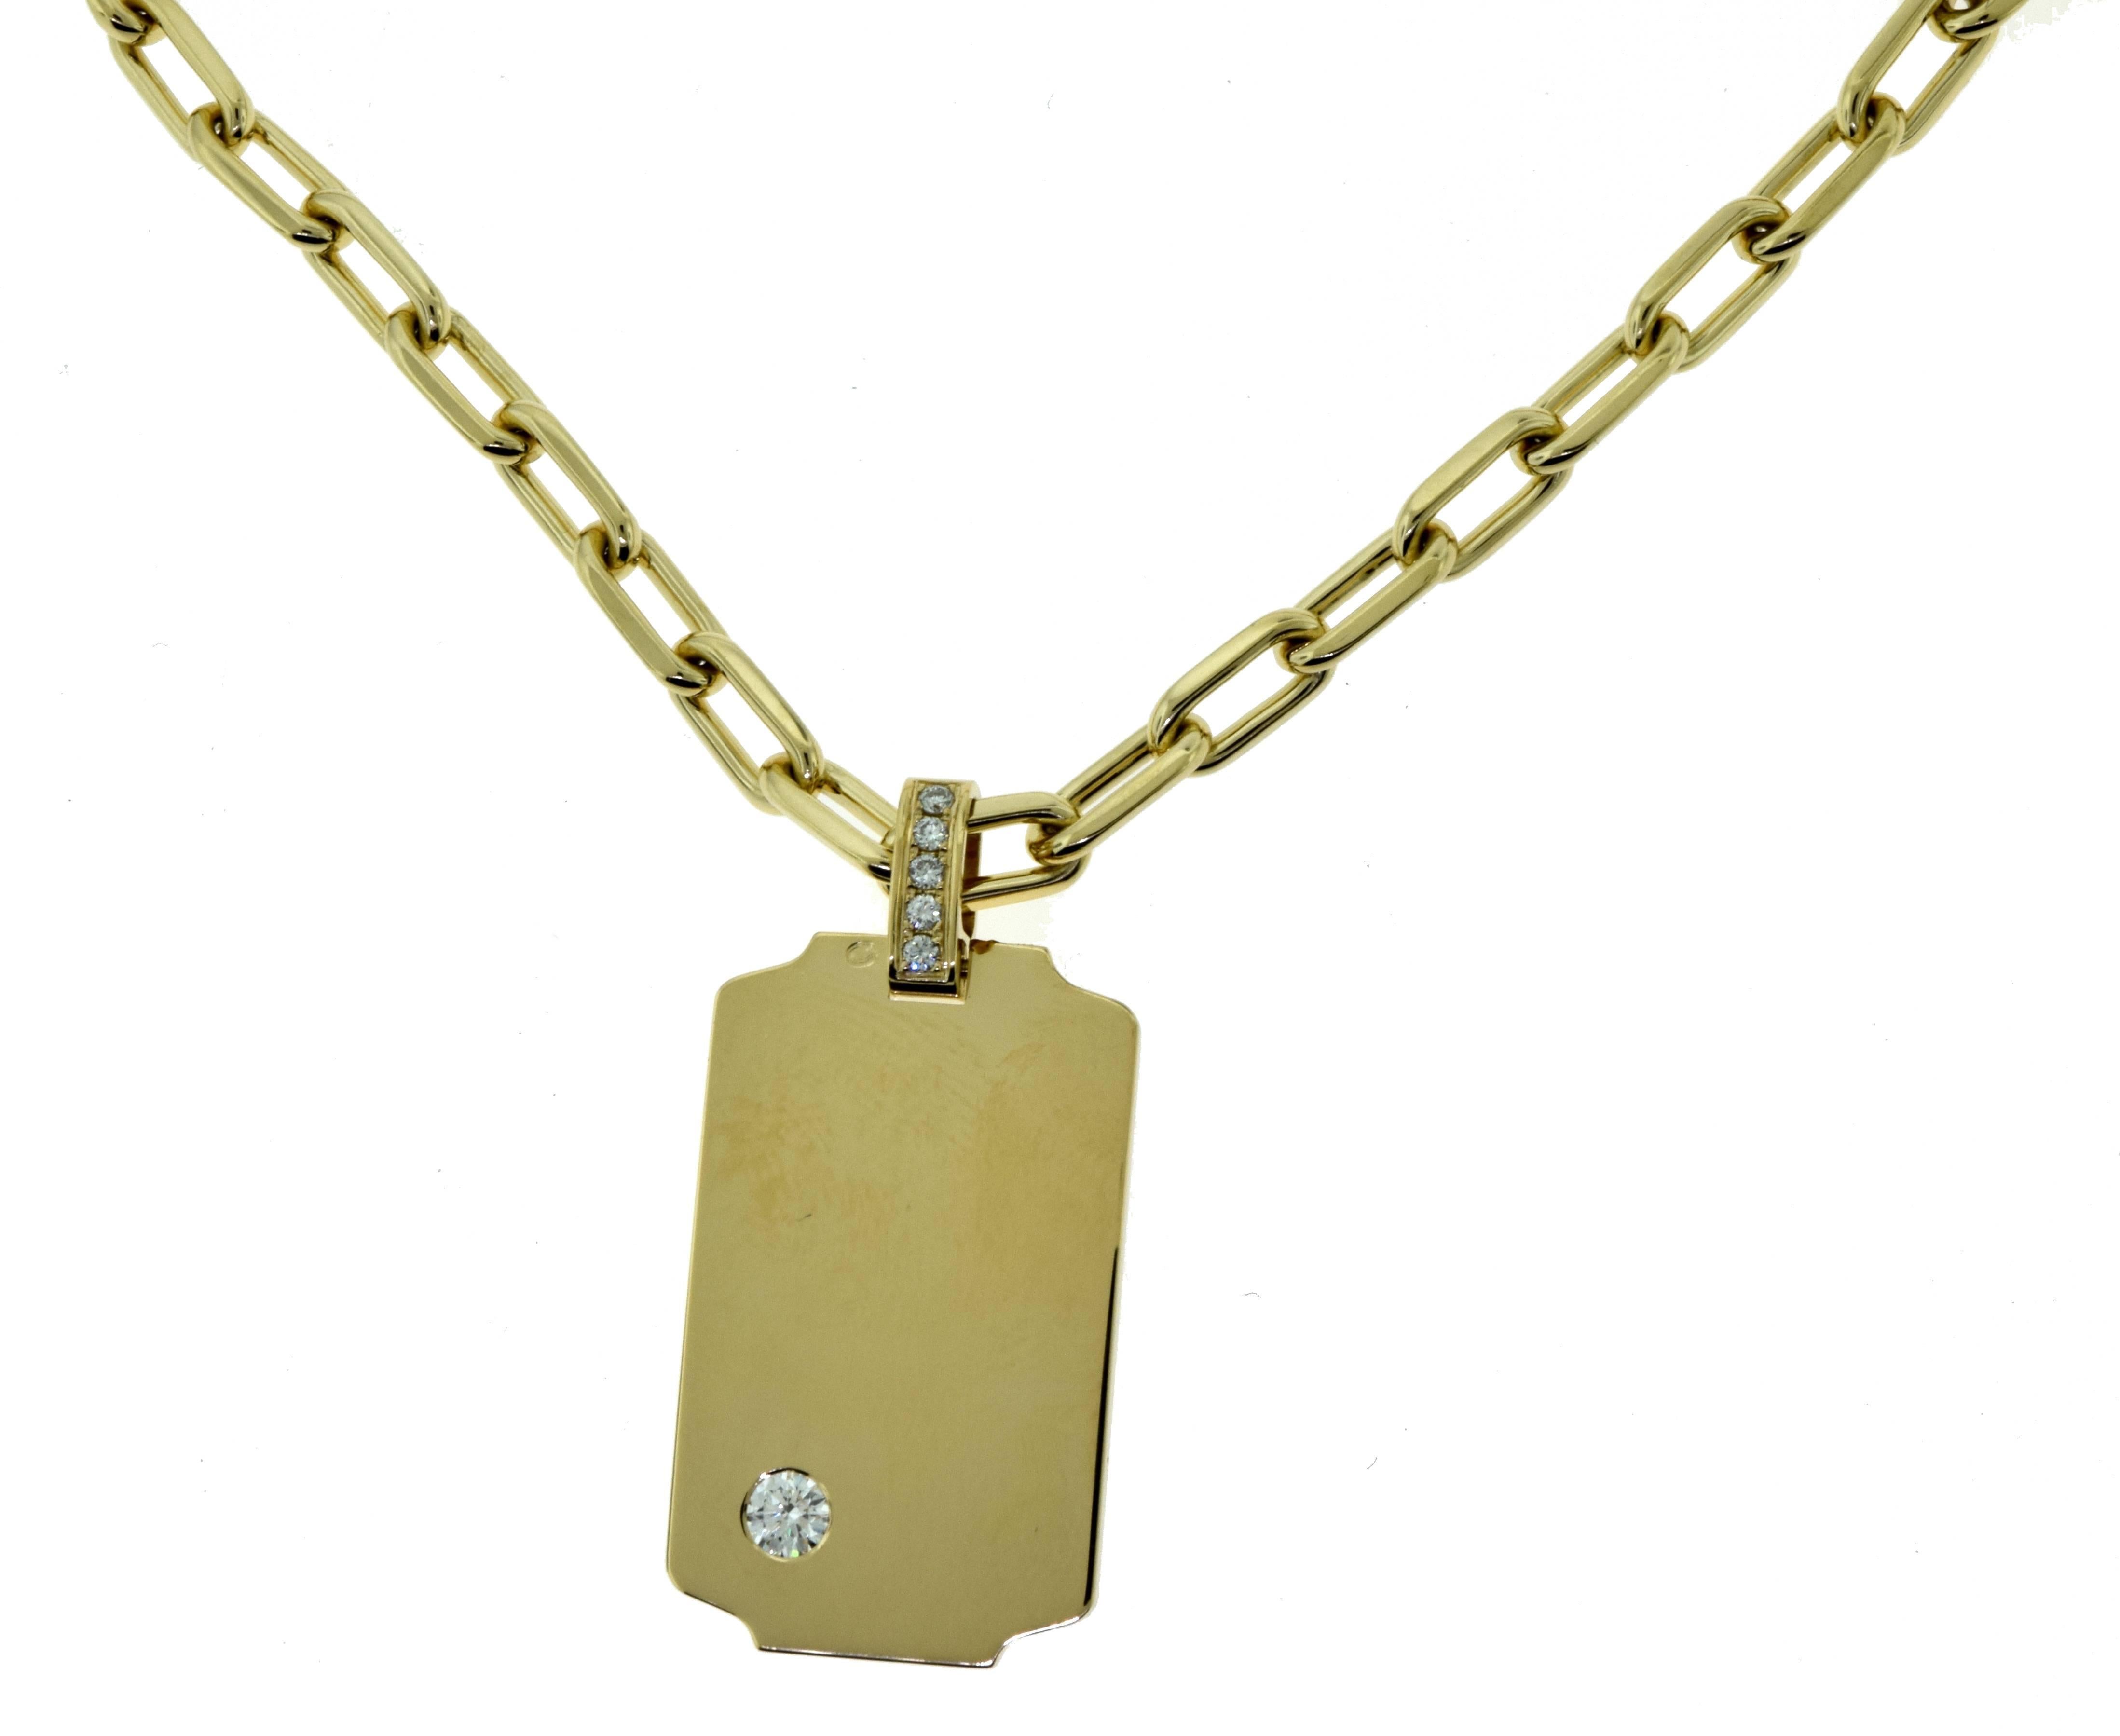 Designer: Cartier
Metal: Yellow Gold
Metal Purity: 18k
Stone: Diamond
Total Carat Weight: 0.22 ct
Total Item Weight (grams): 38.8
Chain Length: 16 inches
Pendant Length: 1.14 inches
Pendant Width: 0.71 inches
Hallmark: Cartier 750 Serial Number